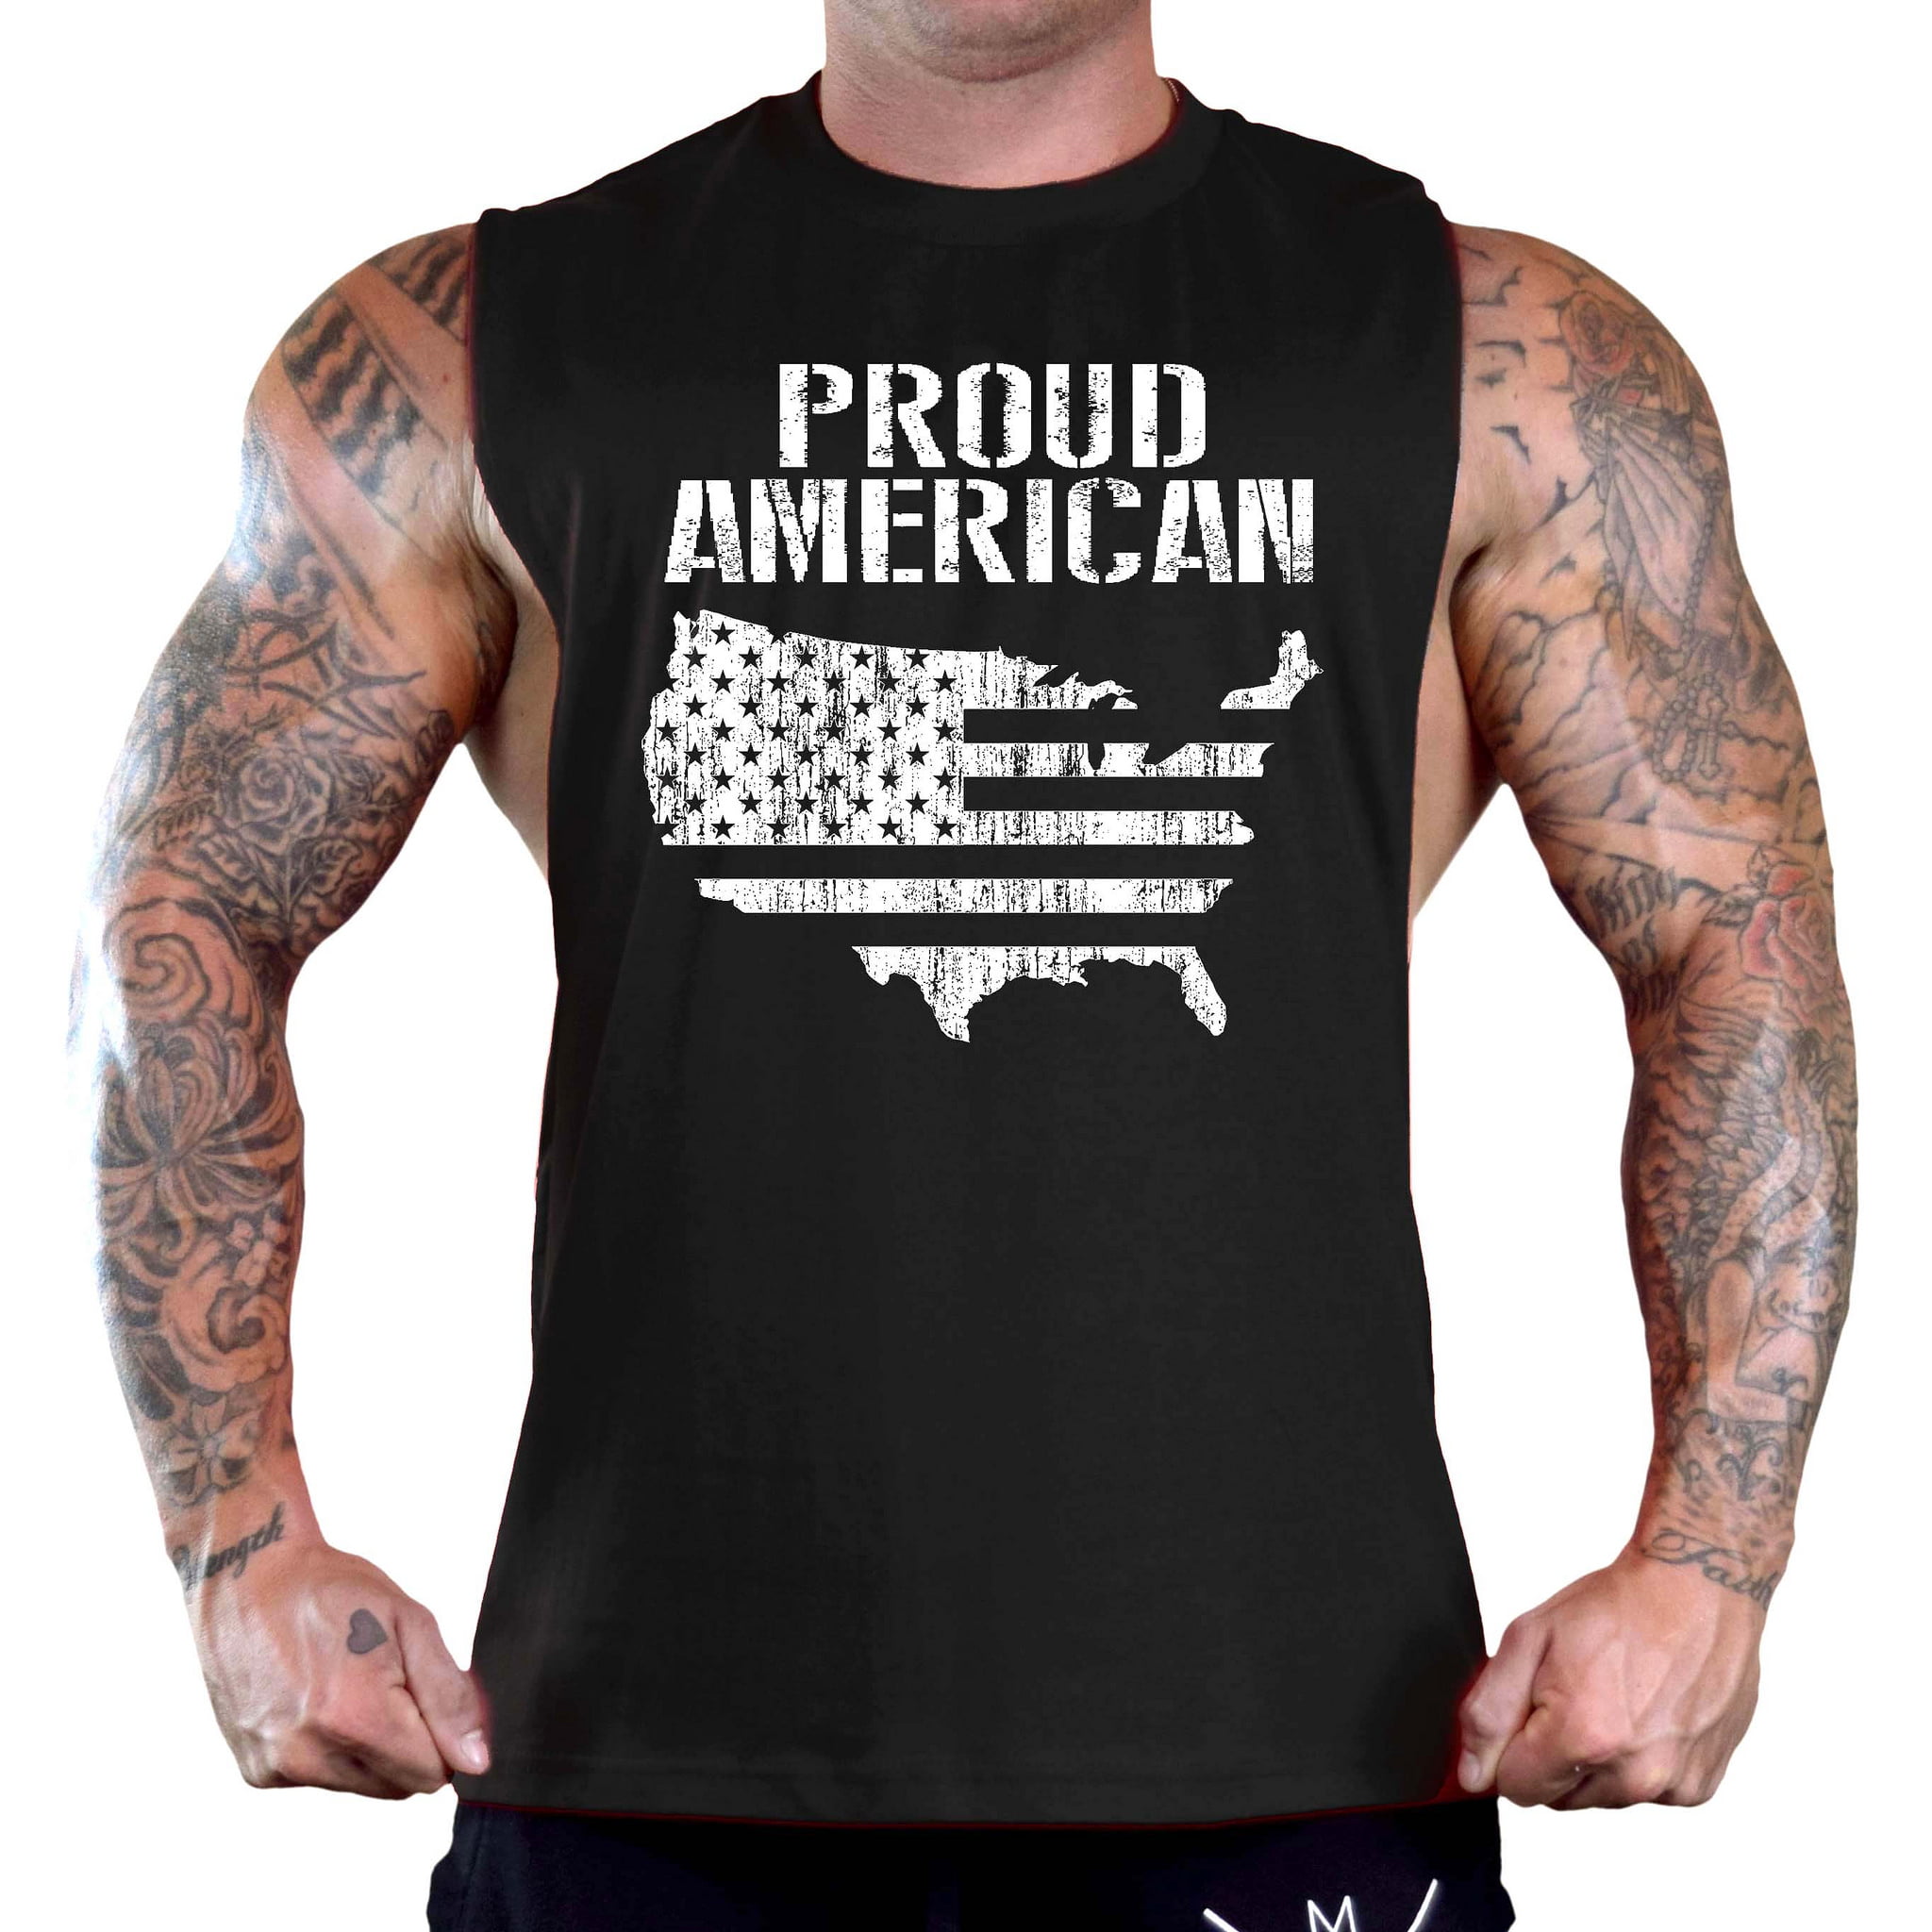 Men's Proud American Map Black T-Shirt Tank Gym Workout Fitness Muscle Athletic